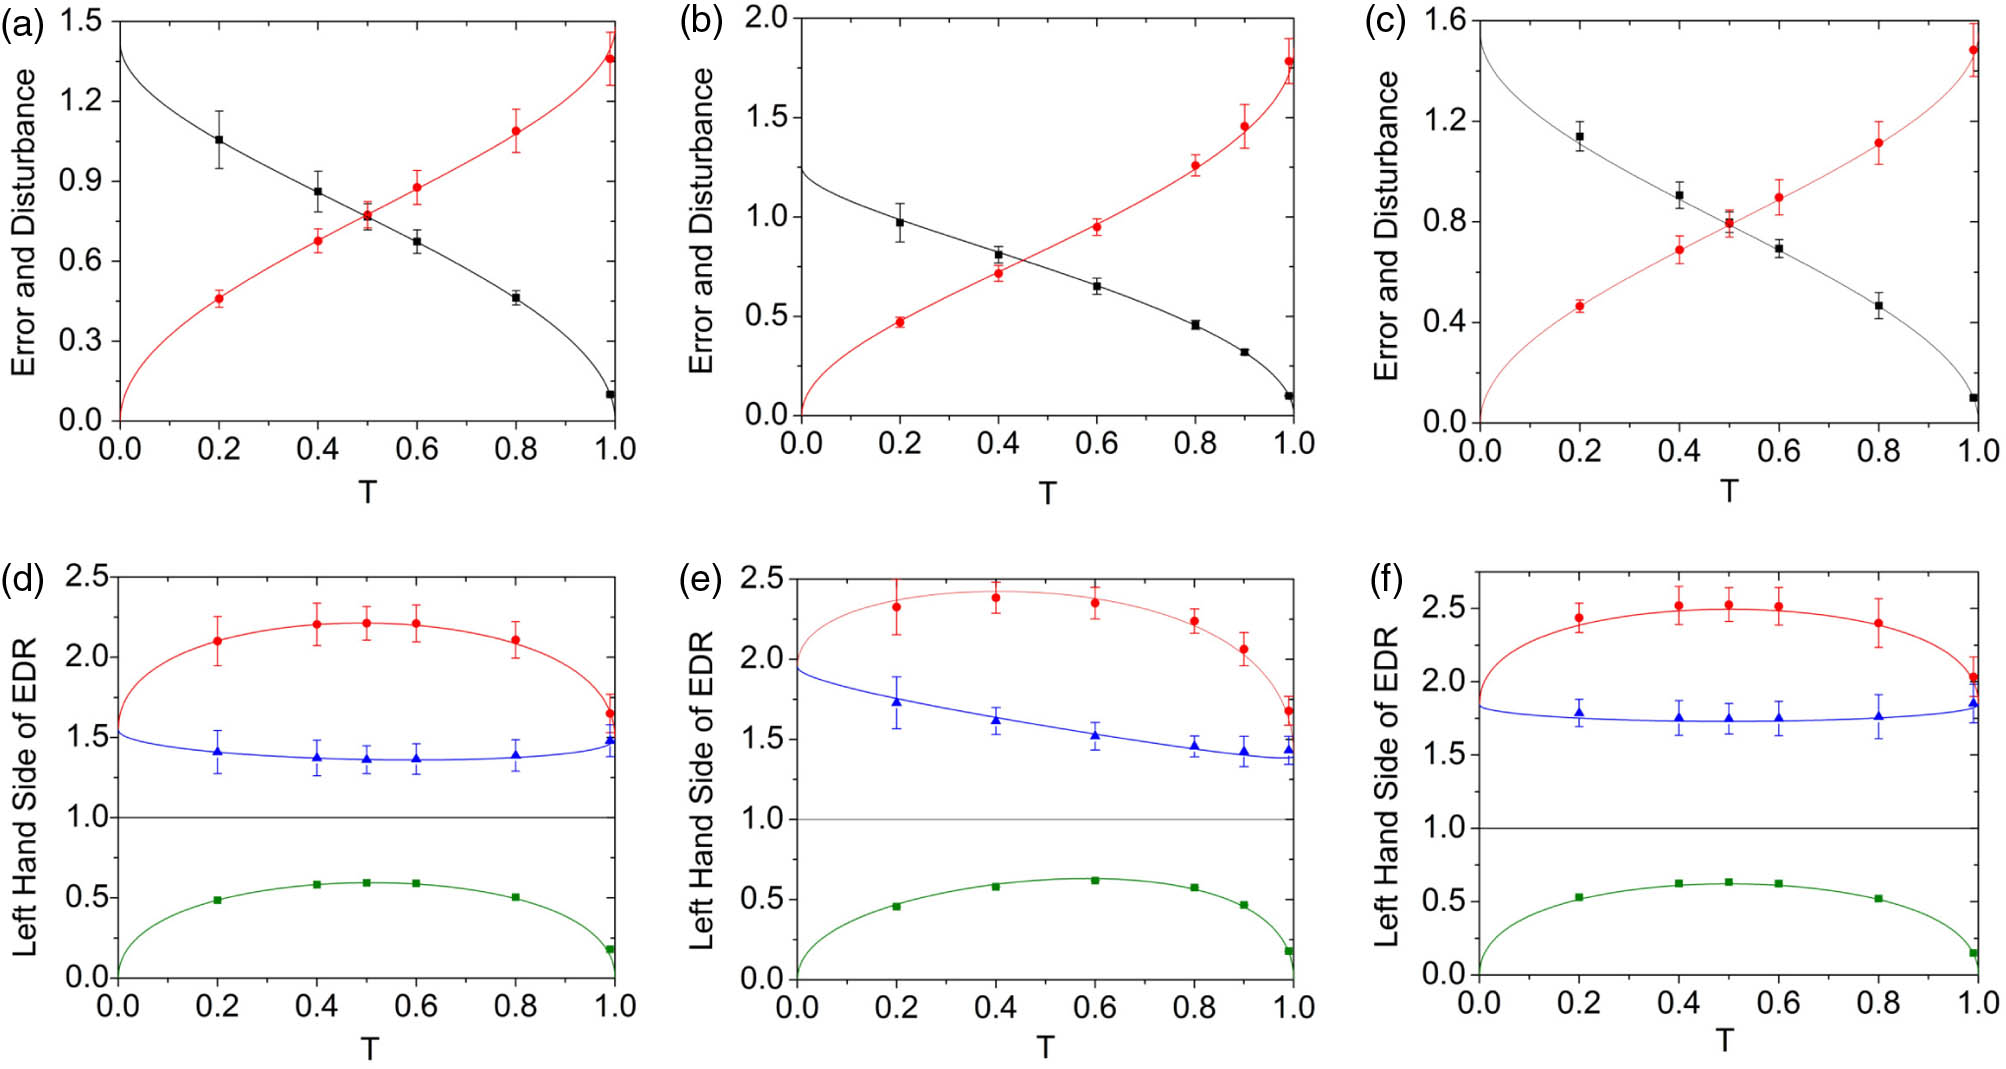 Experimental results. (a), (b) and (c) Dependence of error (black curve) and disturbance (red curve) on the transmission efficiency of BS (T) for coherent, squeezed, and thermal states, respectively. (d), (e) and (f) Lefthand sides of the EDRs with continuous variables for coherent, squeezed, and thermal states, respectively. Green curve, Heisenberg’s EDR; red curve, Ozawa’s EDR; blue curve, Branciard’s EDR. Black line, righthand side of the EDR. All experimental data agree well with the theoretical predictions. The error bars are obtained by RMS of measurements repeated ten times.